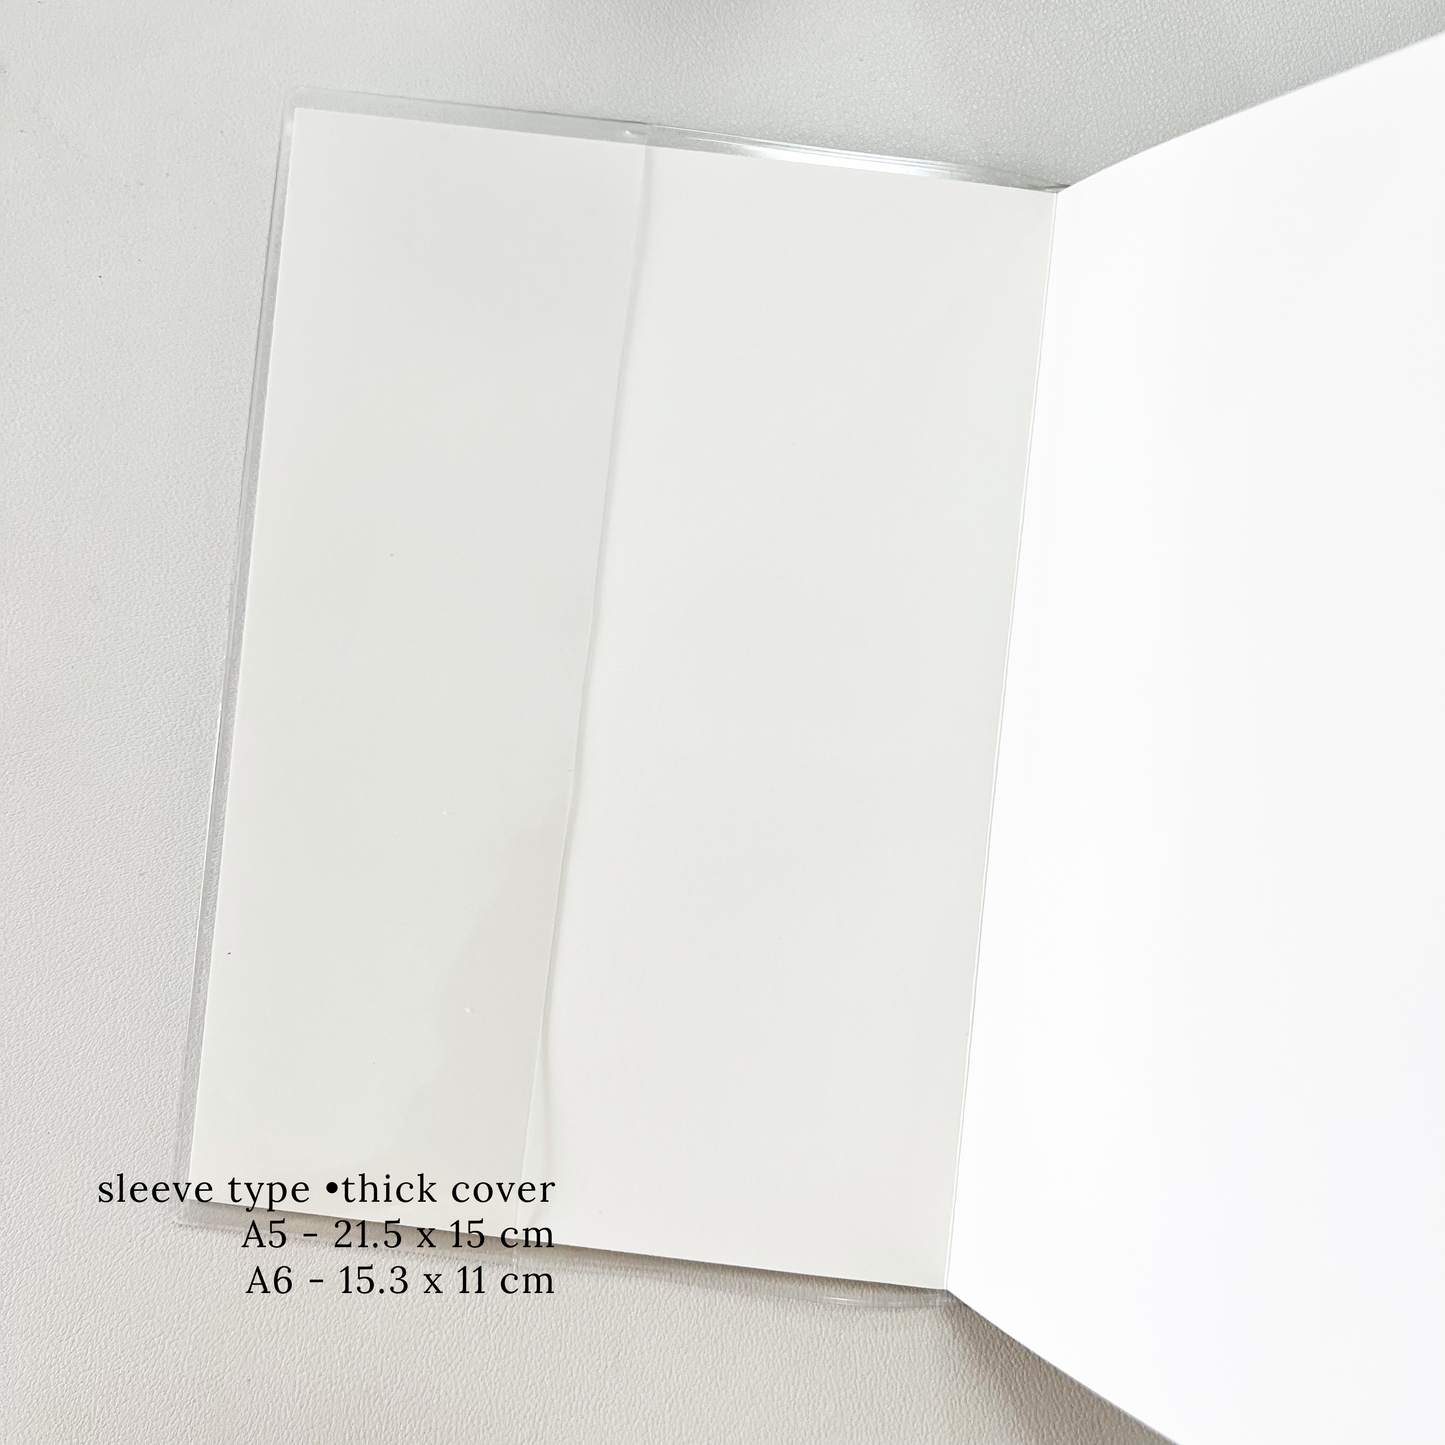 Notebook Clear Cover